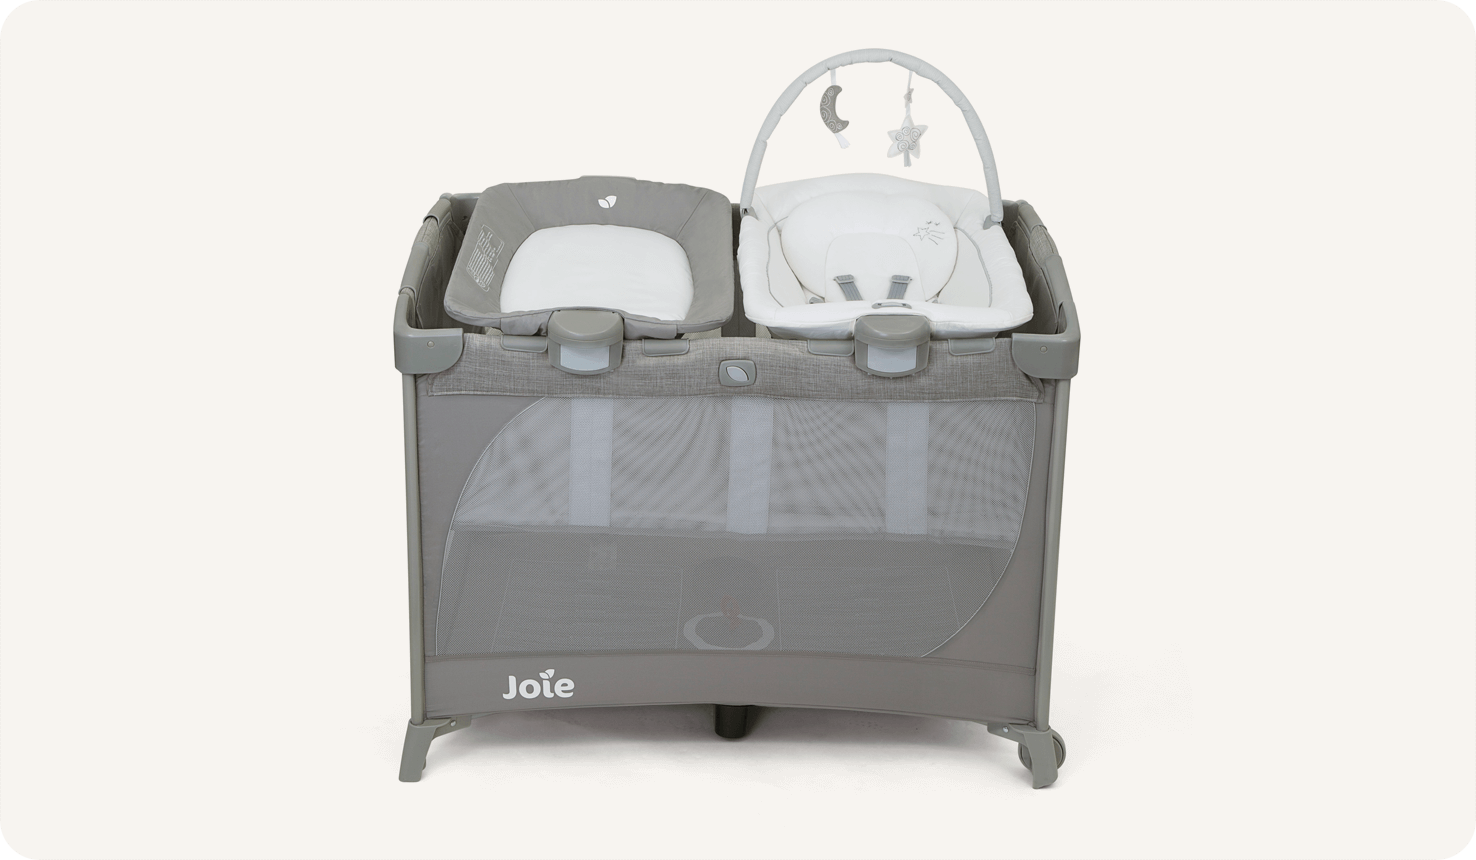 Joie travel cot commuter change & bouncer in grey with bassinet, changer, and bouncer seat at a high side profile.